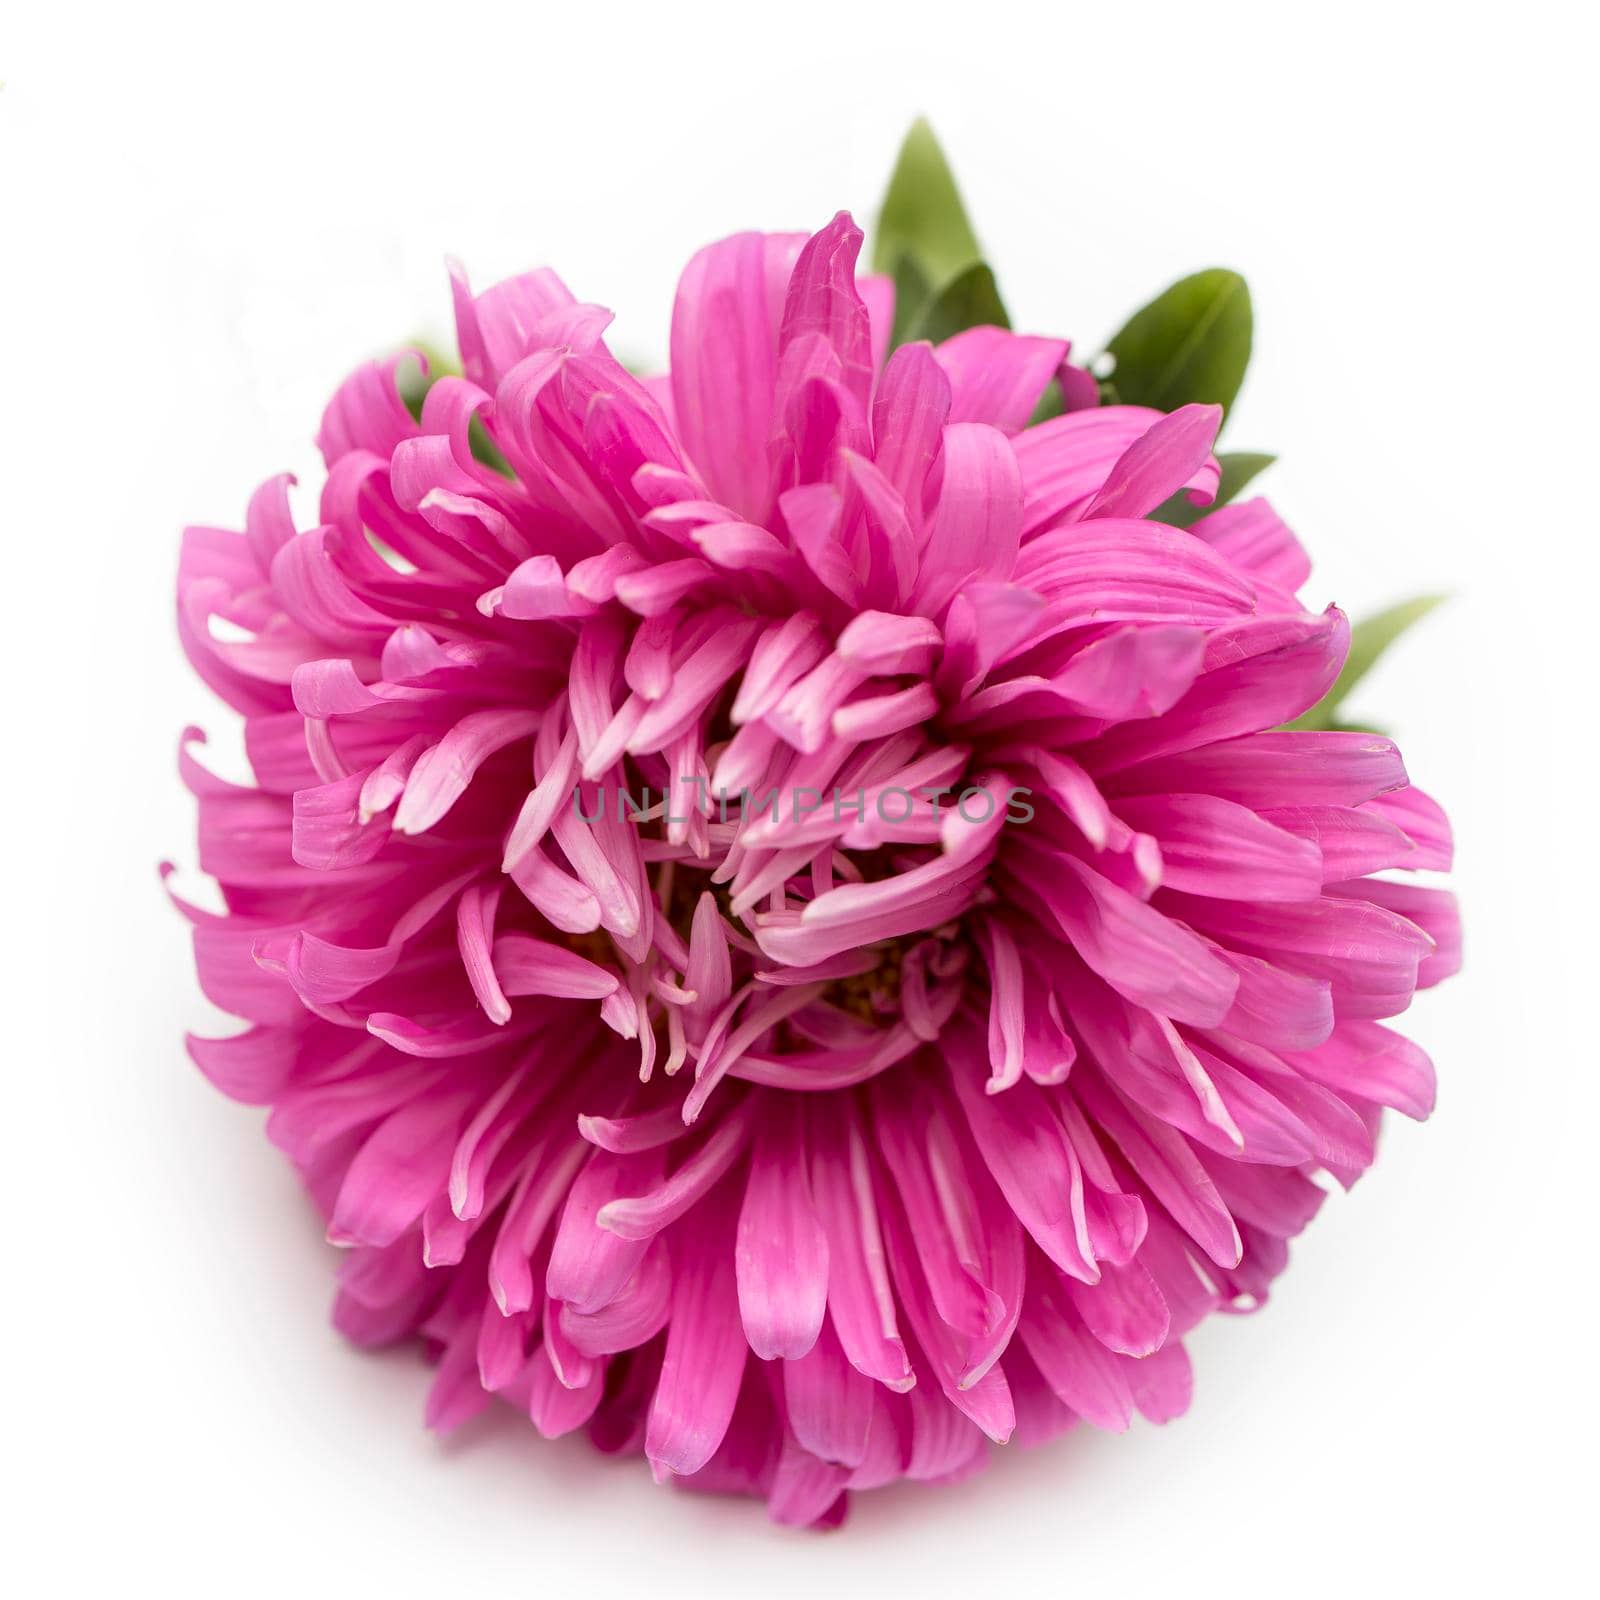 Pink aster flower isolated on white background. Place for text. Copy space